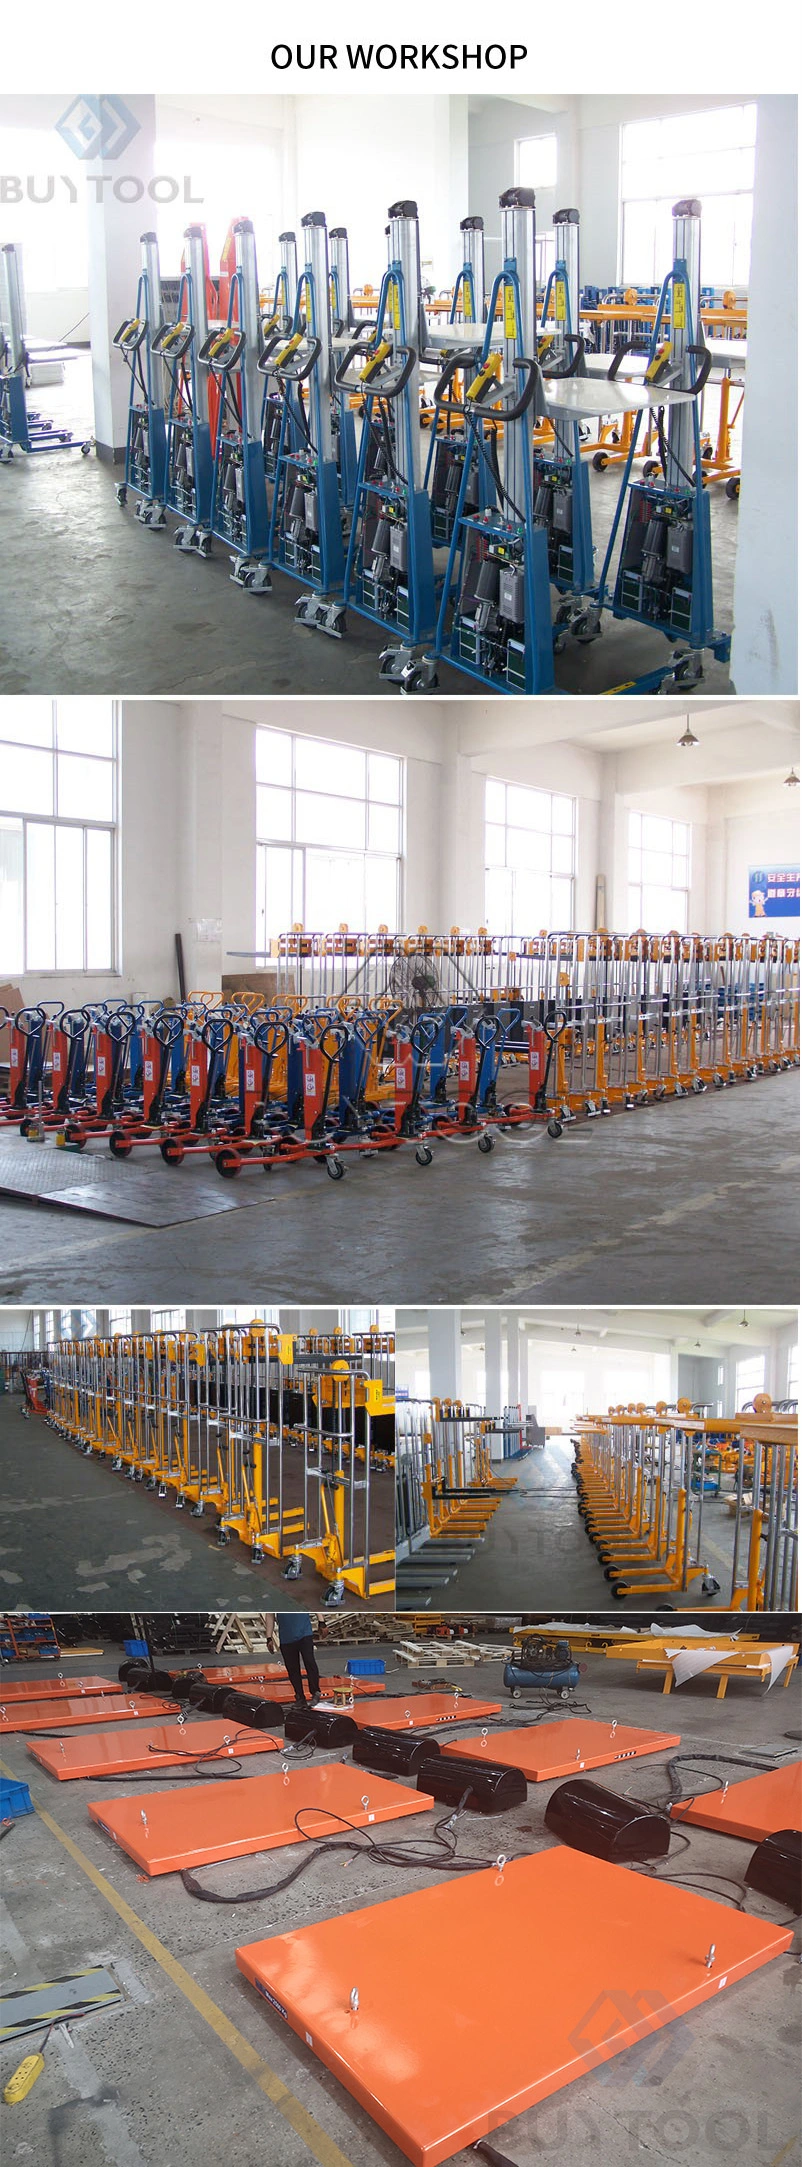 Scissor Lift with Integreated Pop-up Ball Transfer Table